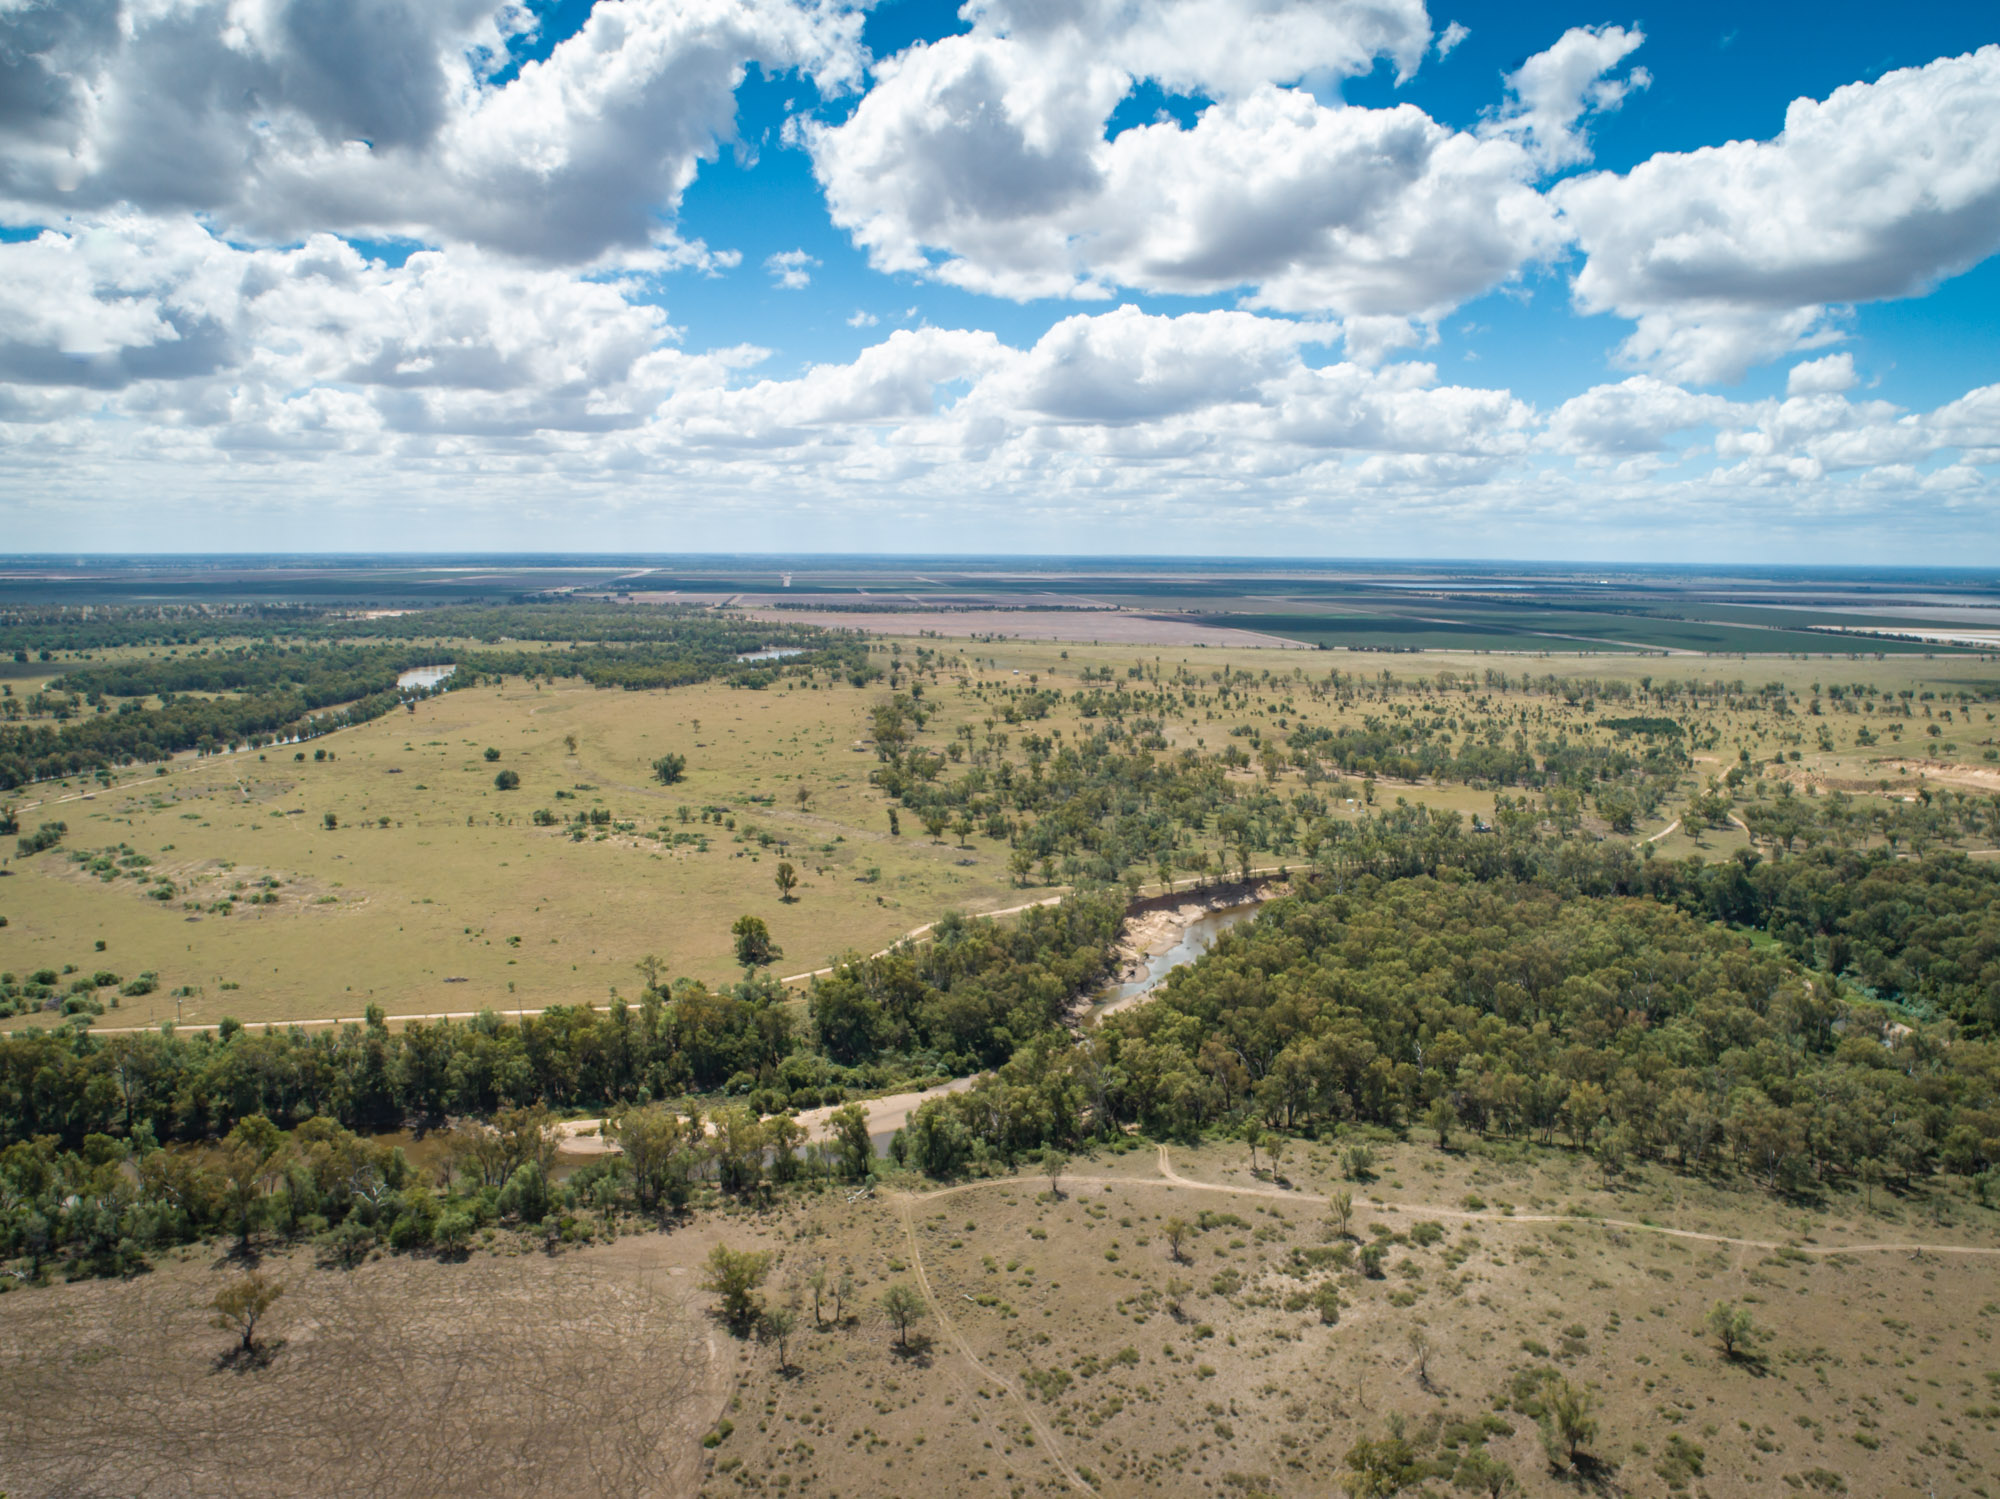 Aerial view of the Macintyre River near Boggabilla showing blue sky and the tree lined river winding through the landscape